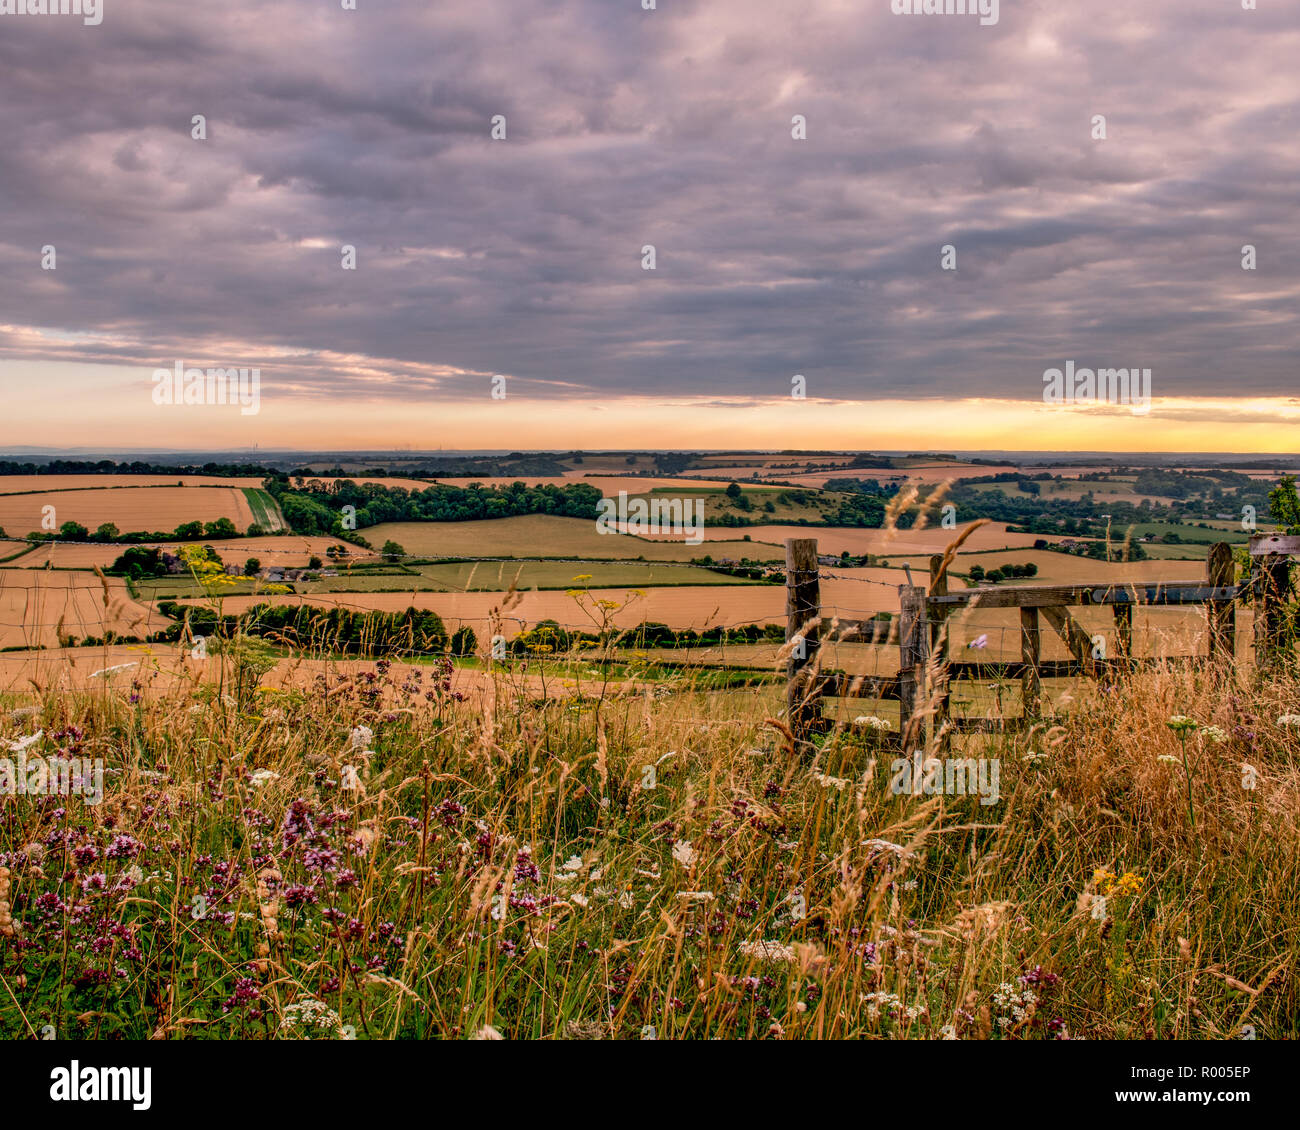 a Typical English countryside scene with a wooden gate surrounded by wildflowers Stock Photo